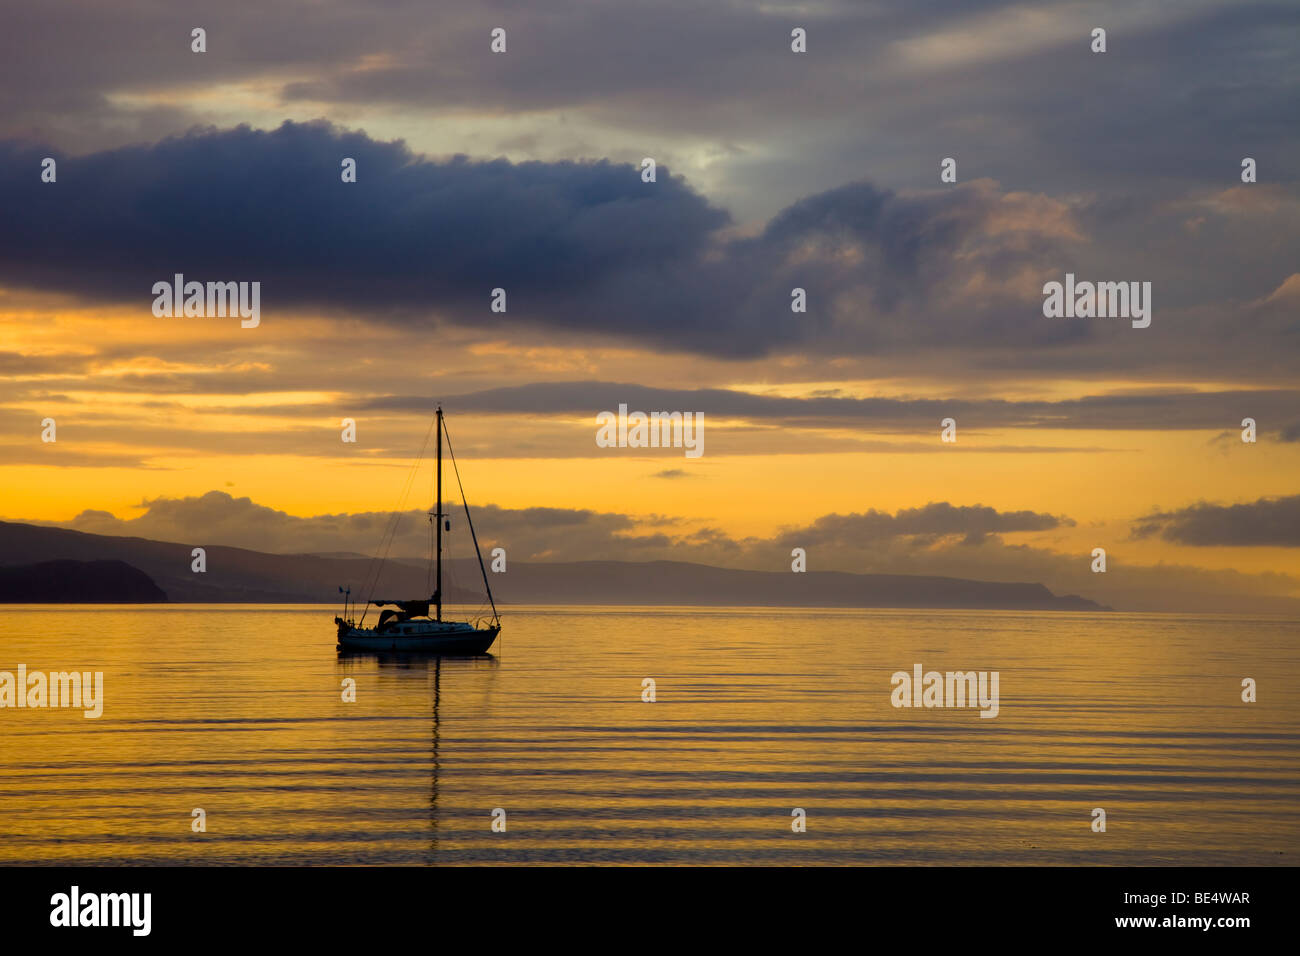 Yatch anchored in Browns Bay, Islandmagee, County Antrim at sunset Stock Photo